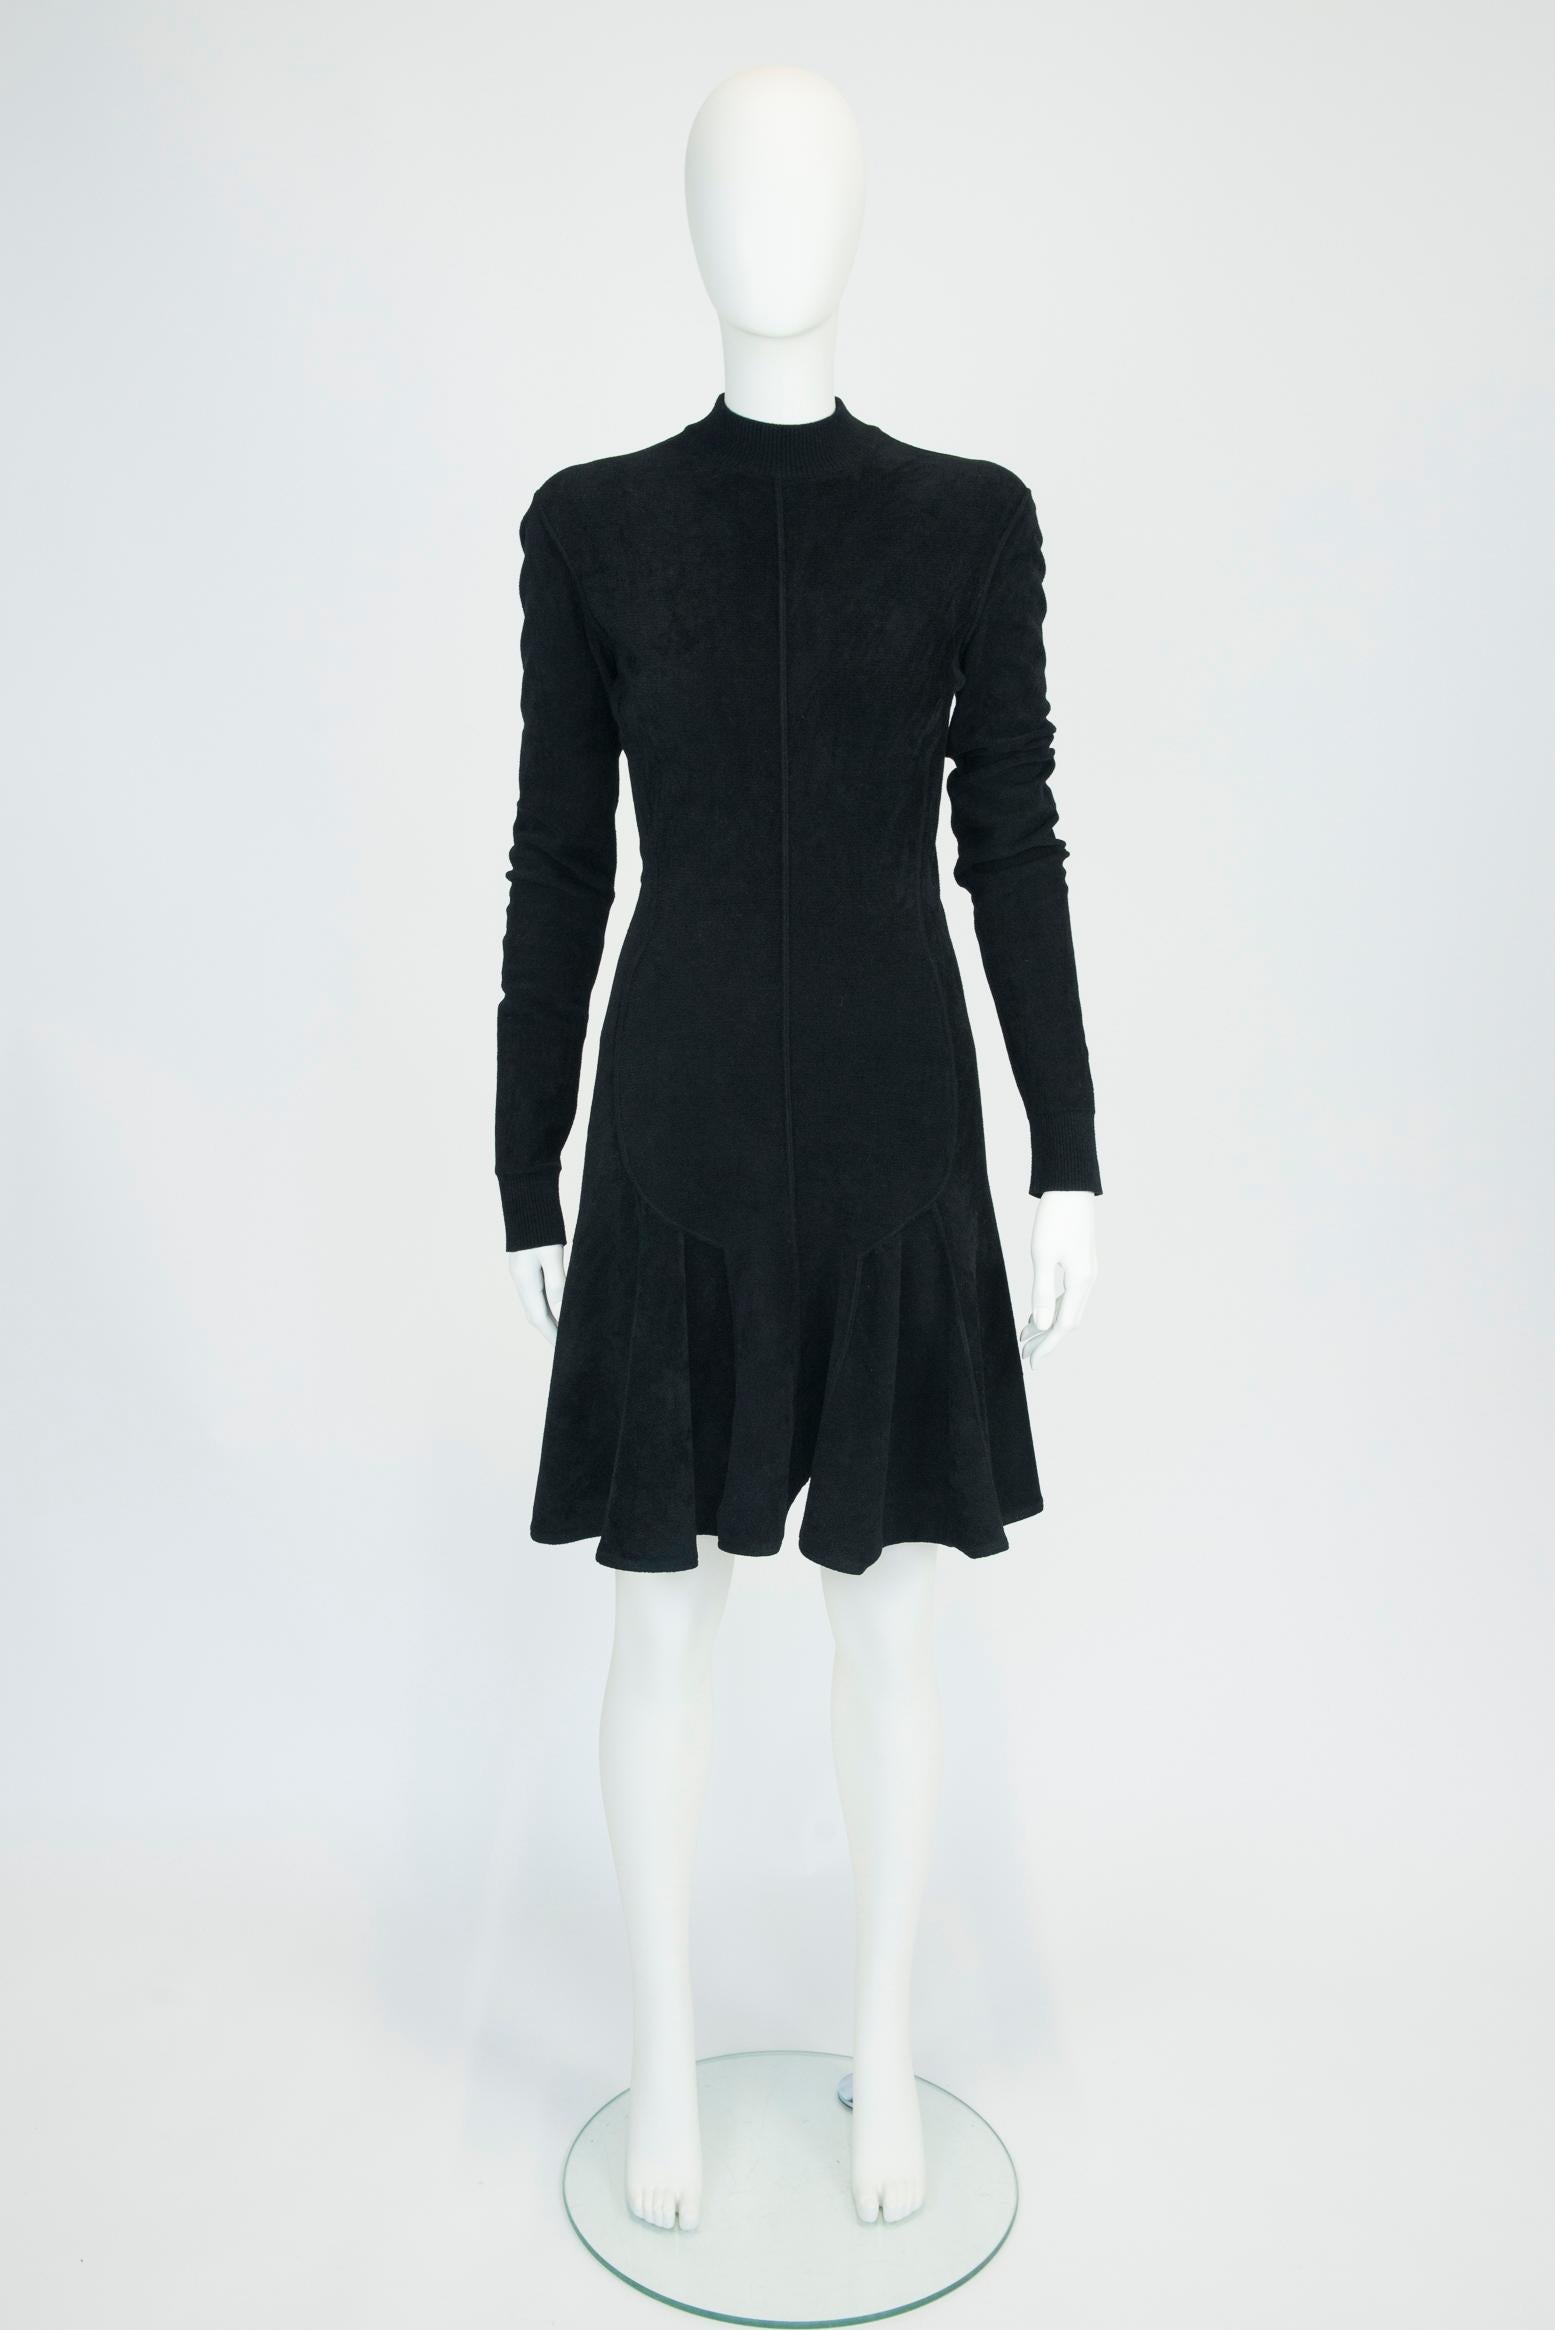 Behind Azzedine Alaïa's refined couturier skills was a simple desire to make women feel their best, confident. Made from stretchy plush black velvet, the dress has a fitted bust and waist and gently flares out to a skater-style mini skirt - an